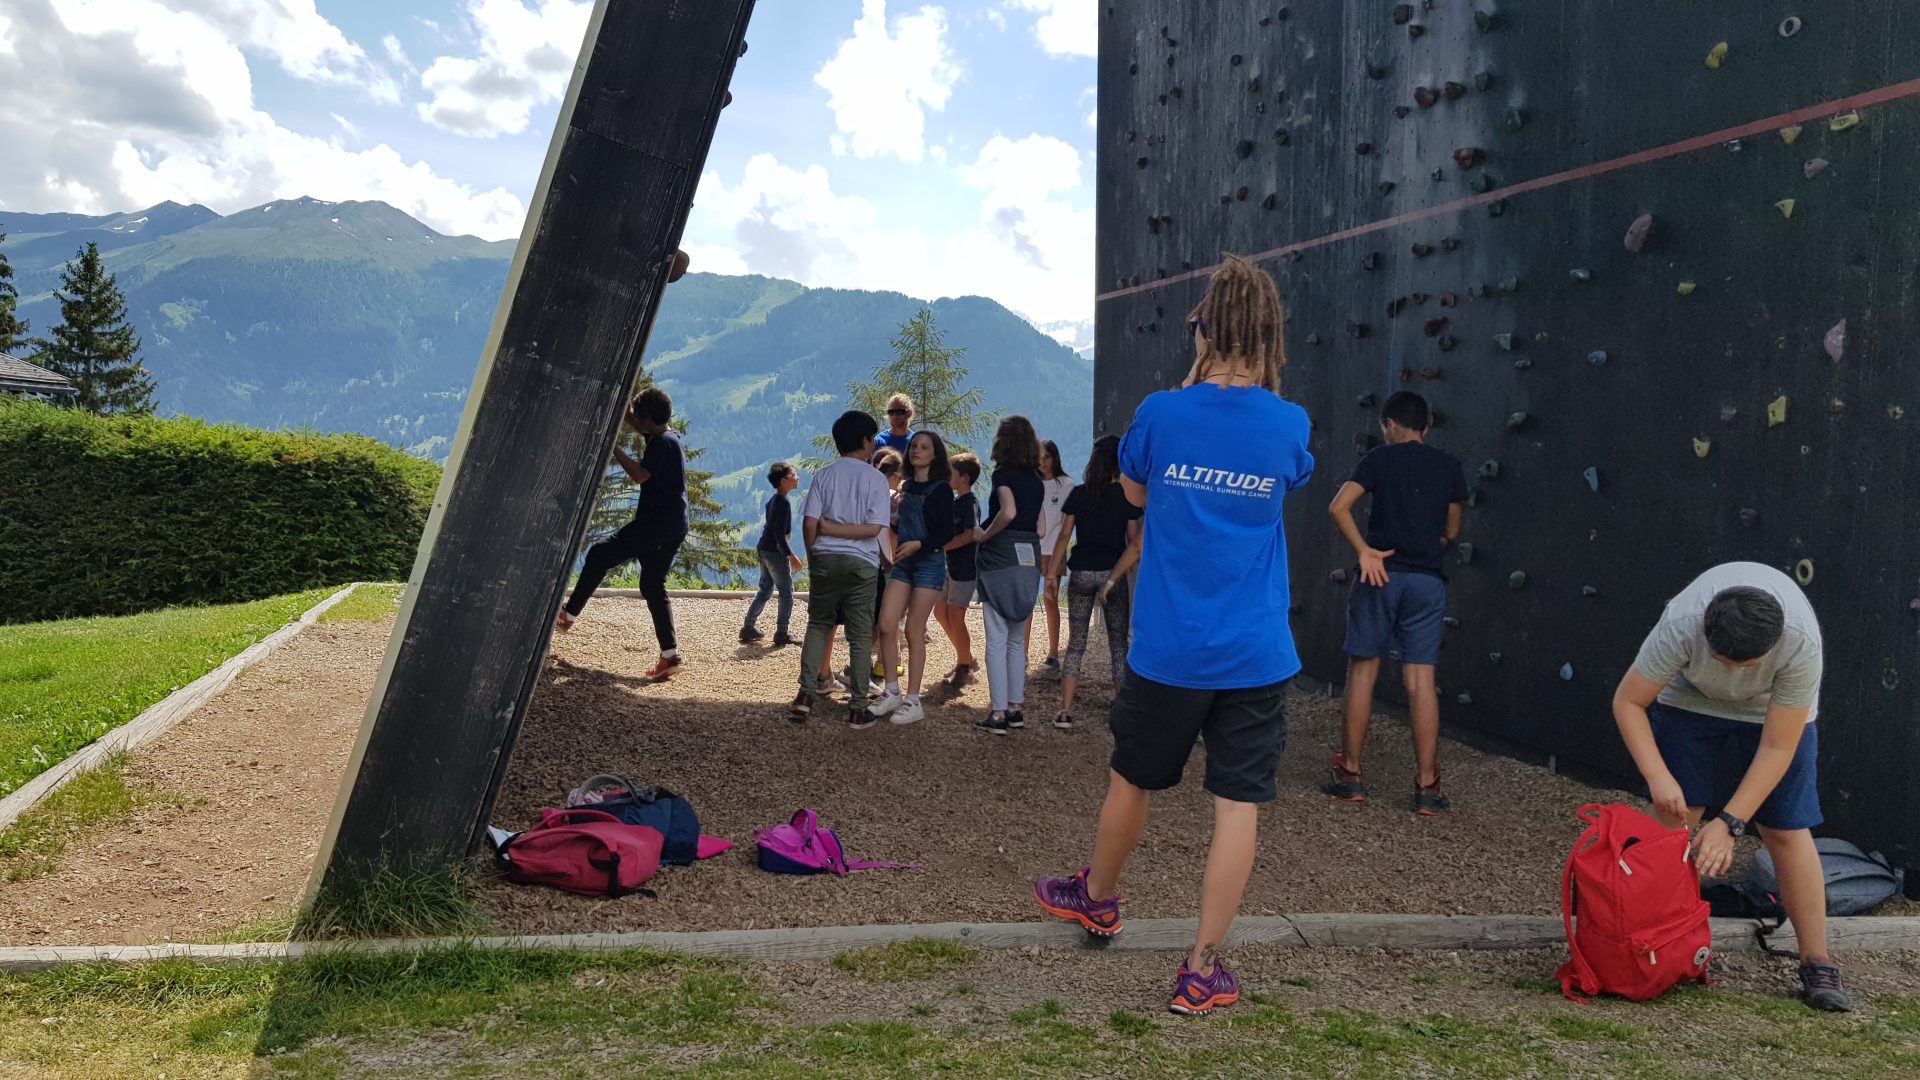 Altitude Camps - kids climbing in the outdoor park